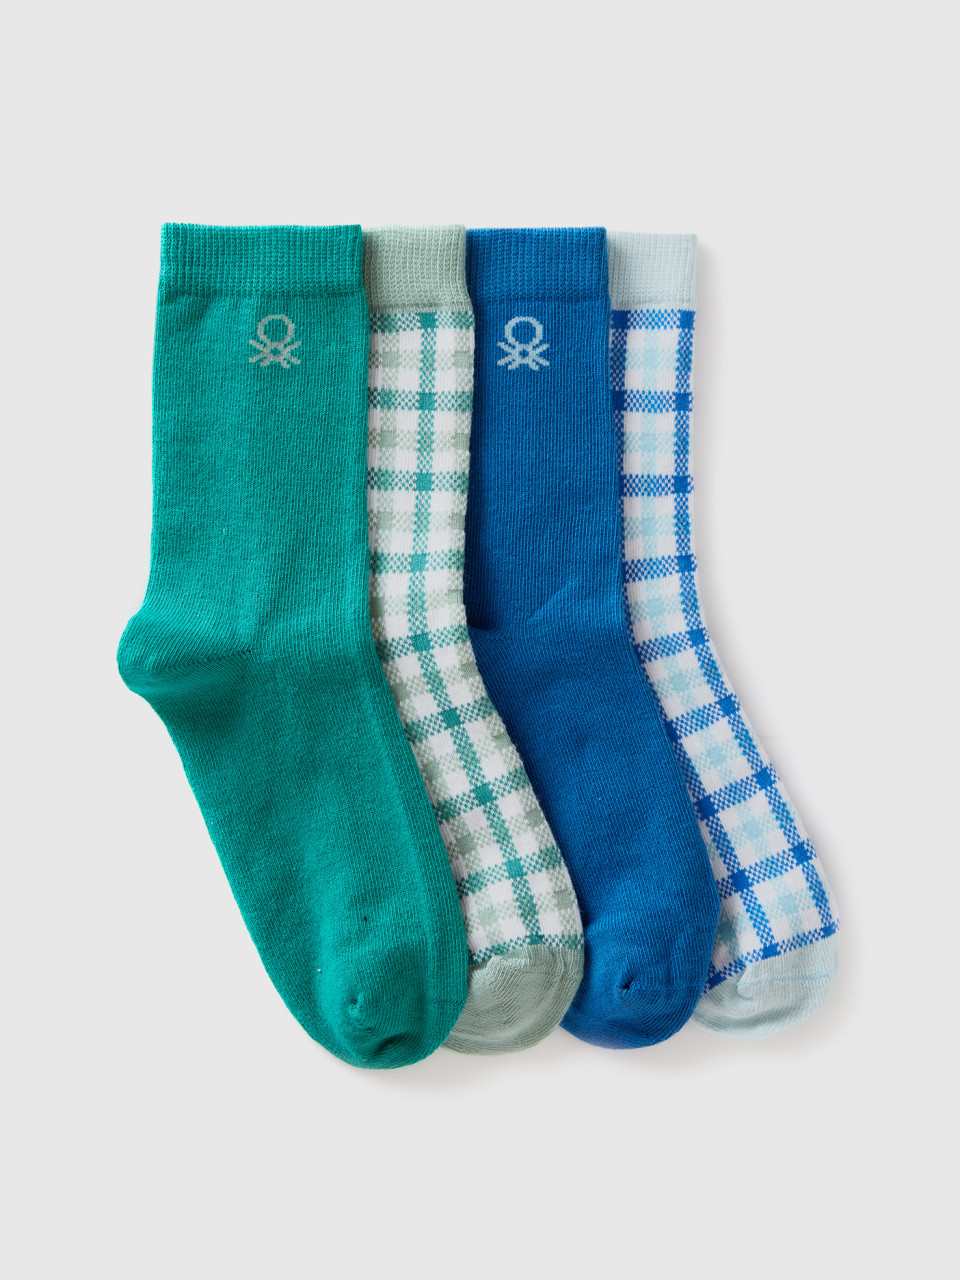 Benetton, Four Pairs Of Socks In Organic Cotton Blend, Multi-color, Kids